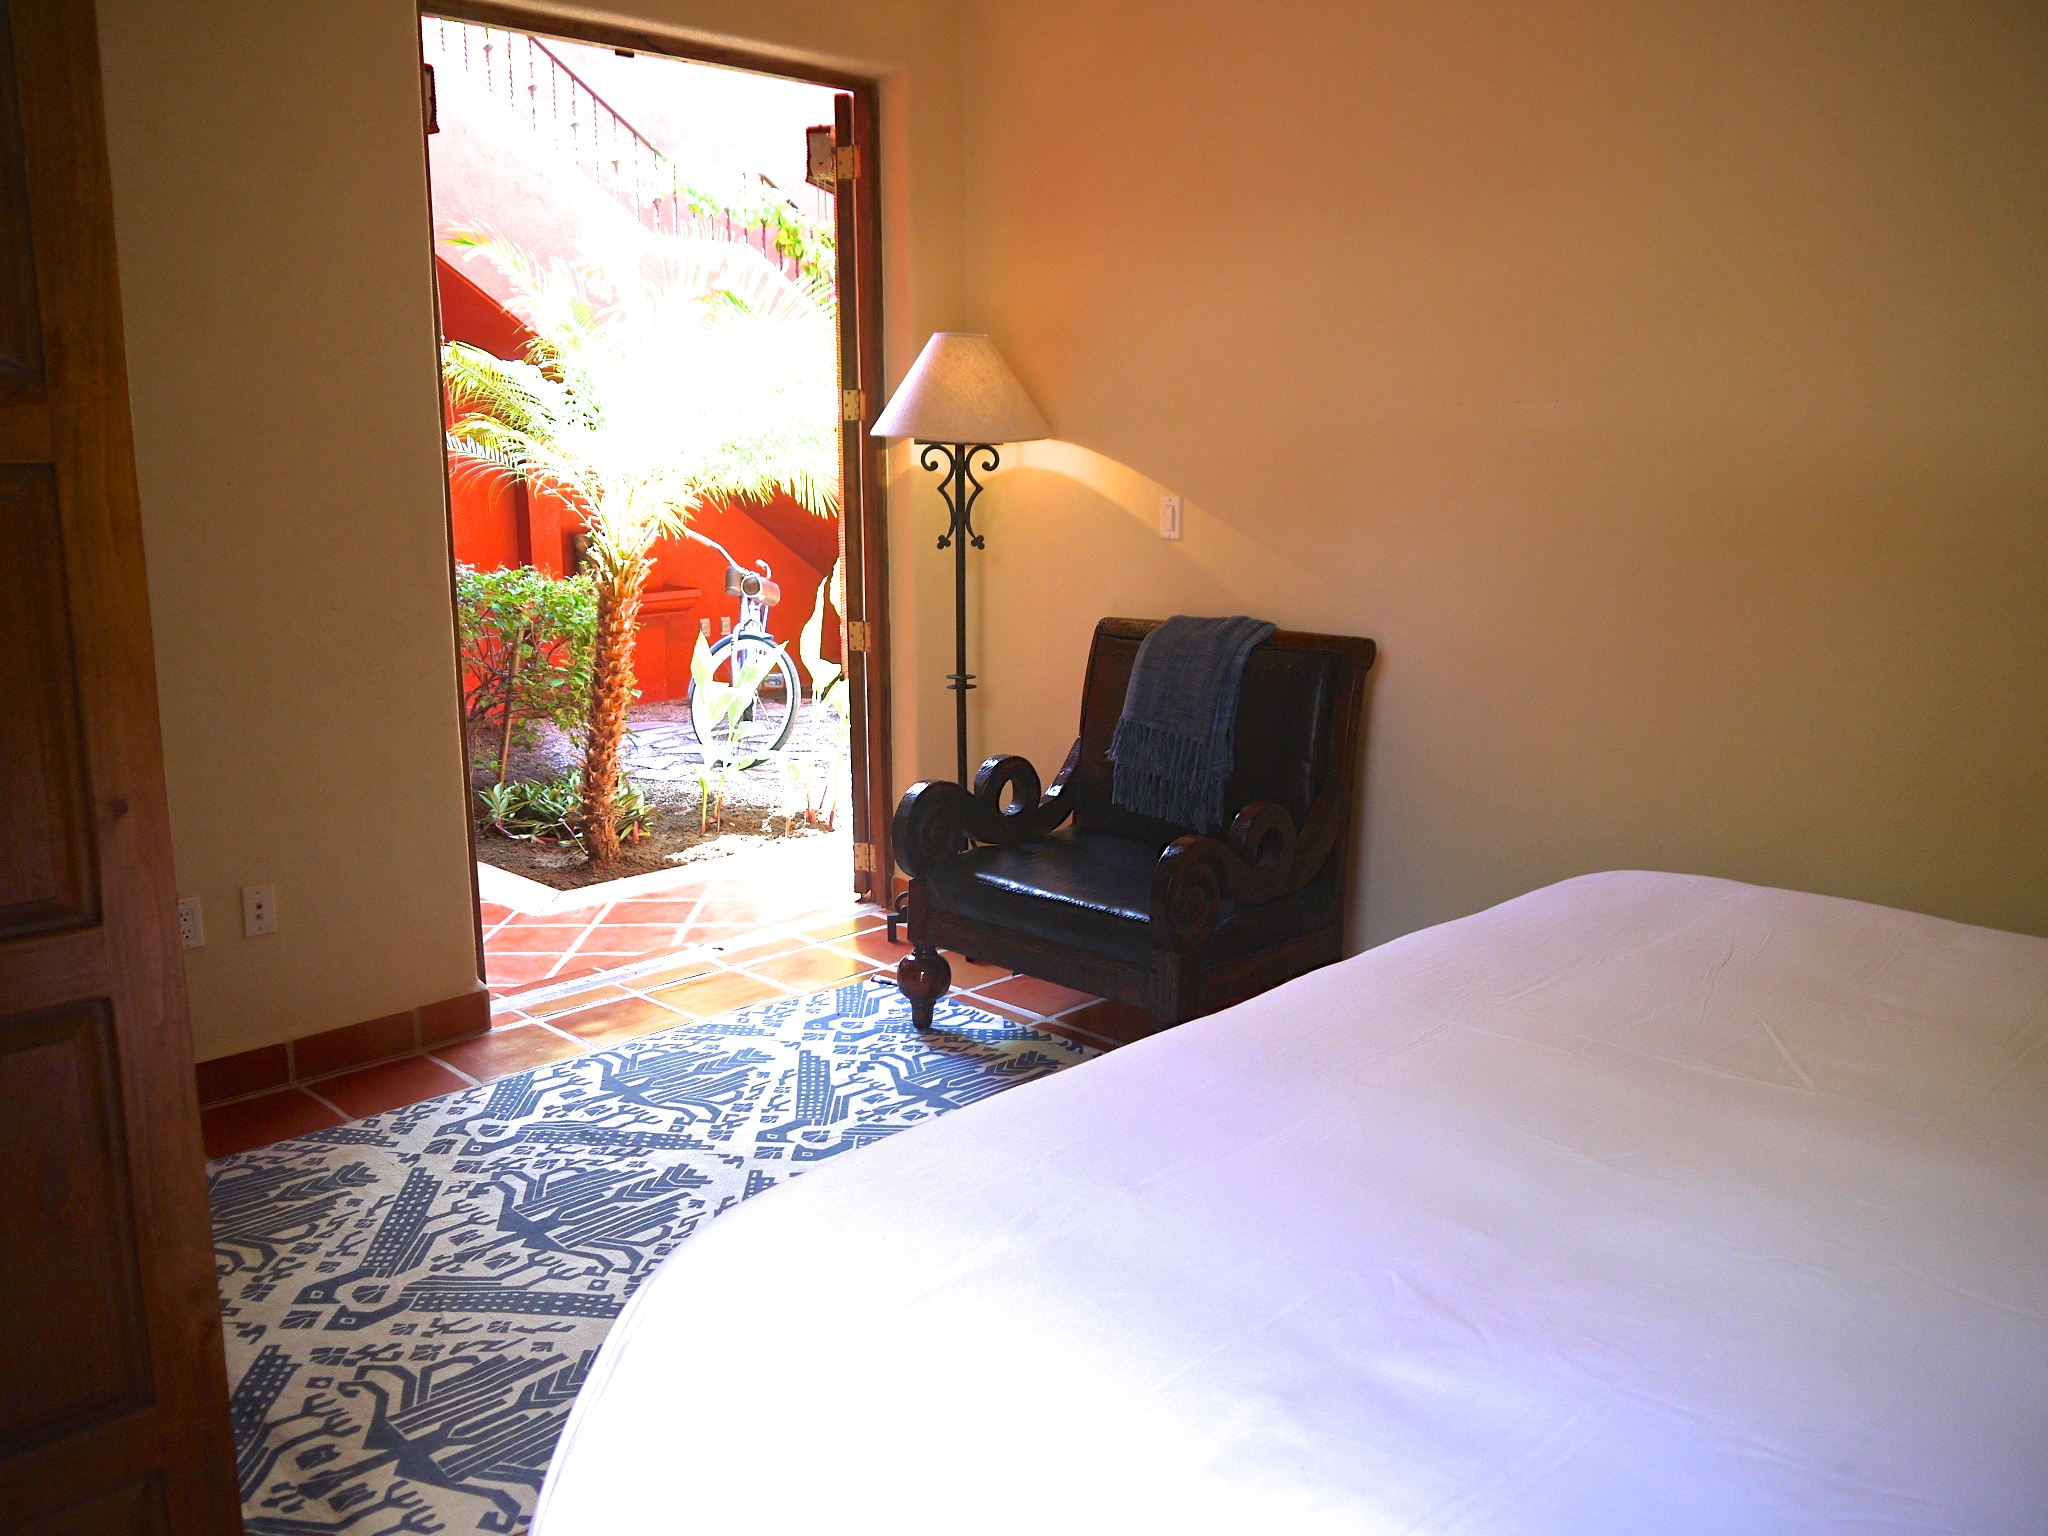 Ground floor master bedroom opening onto main fountain courtyard that the villa is built around